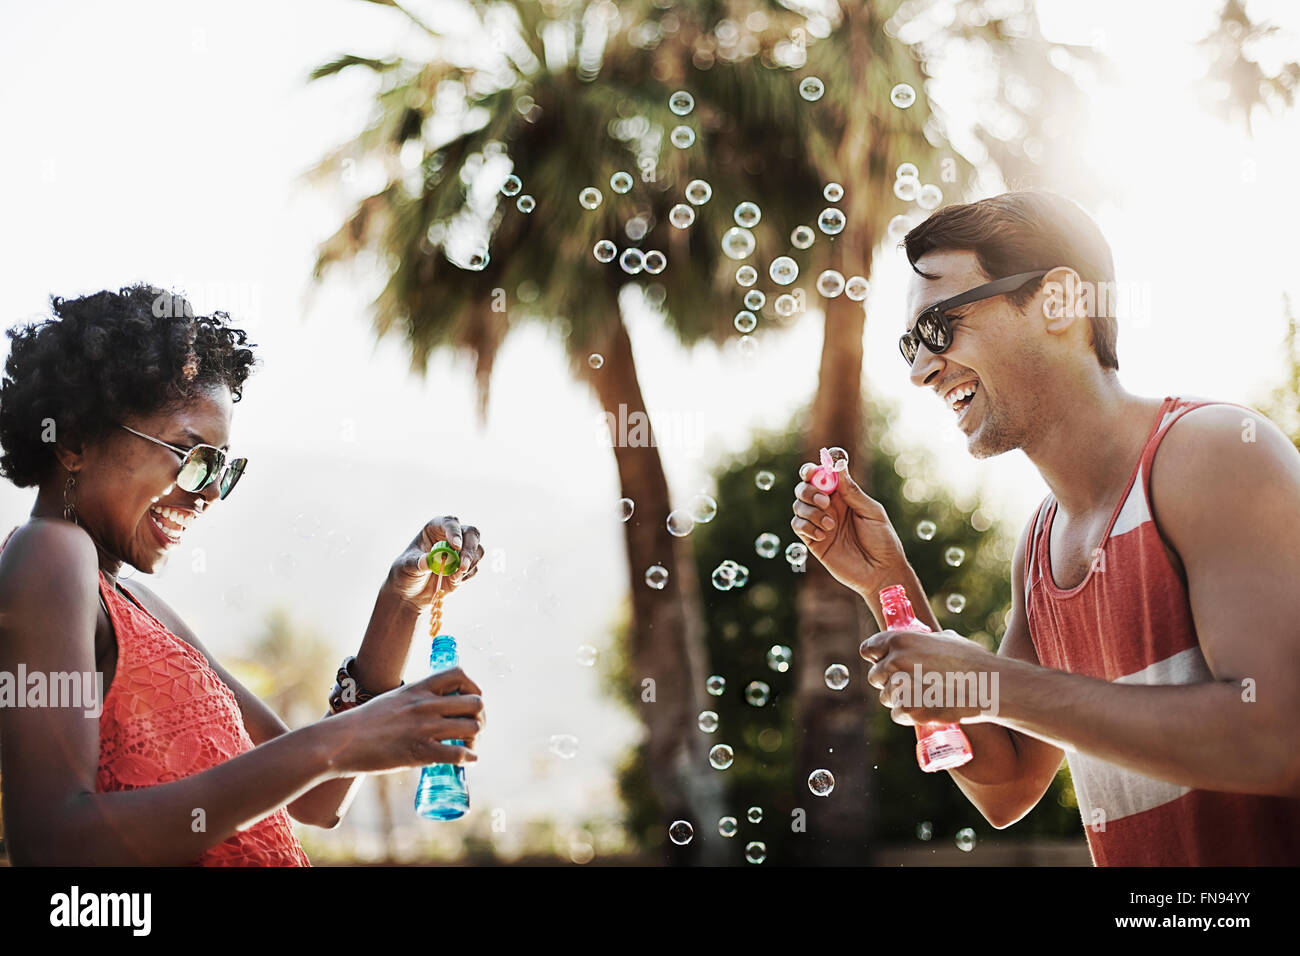 Two people blowing bubbles using bubble wands. Stock Photo